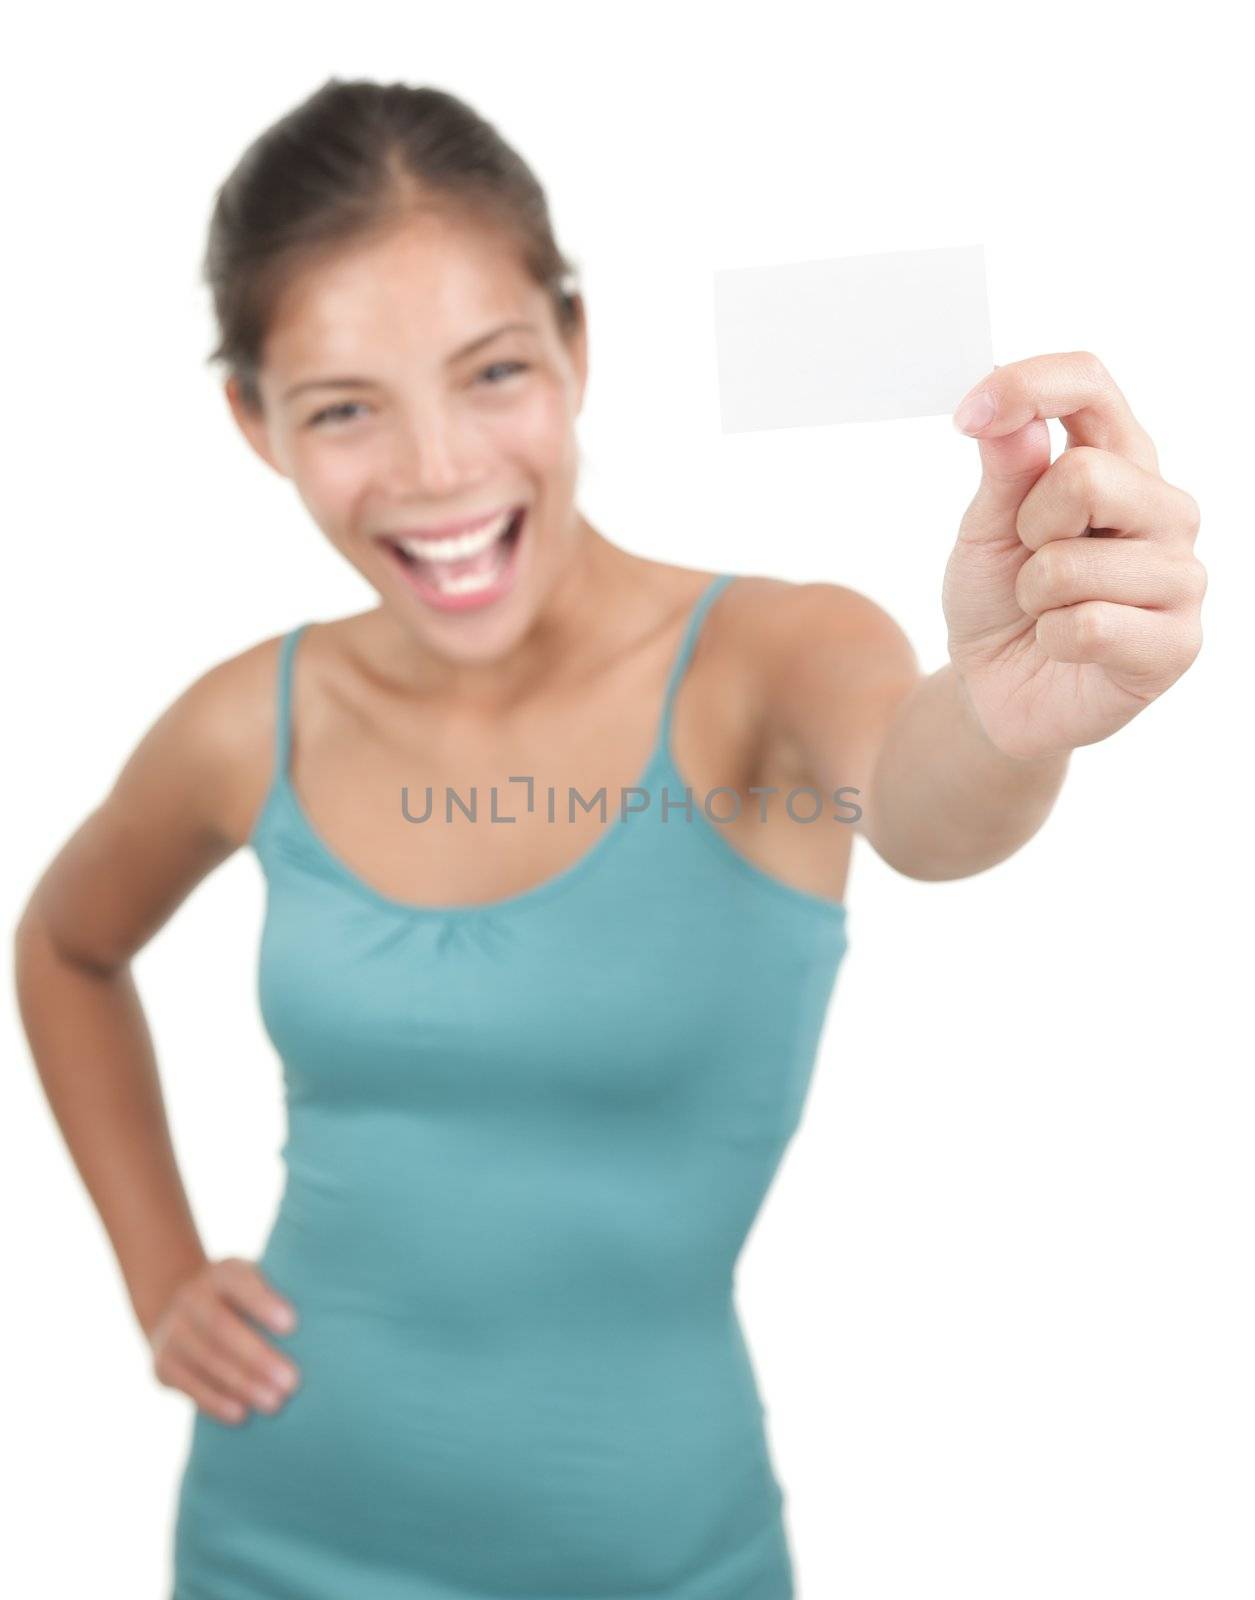 Blank sign / business card. Beautiful young woman with an excited big smile displaying a blank business card / notecard. Shallow depth of field, focus on card. Isolated on white background. Mixed race asian / caucasian model.